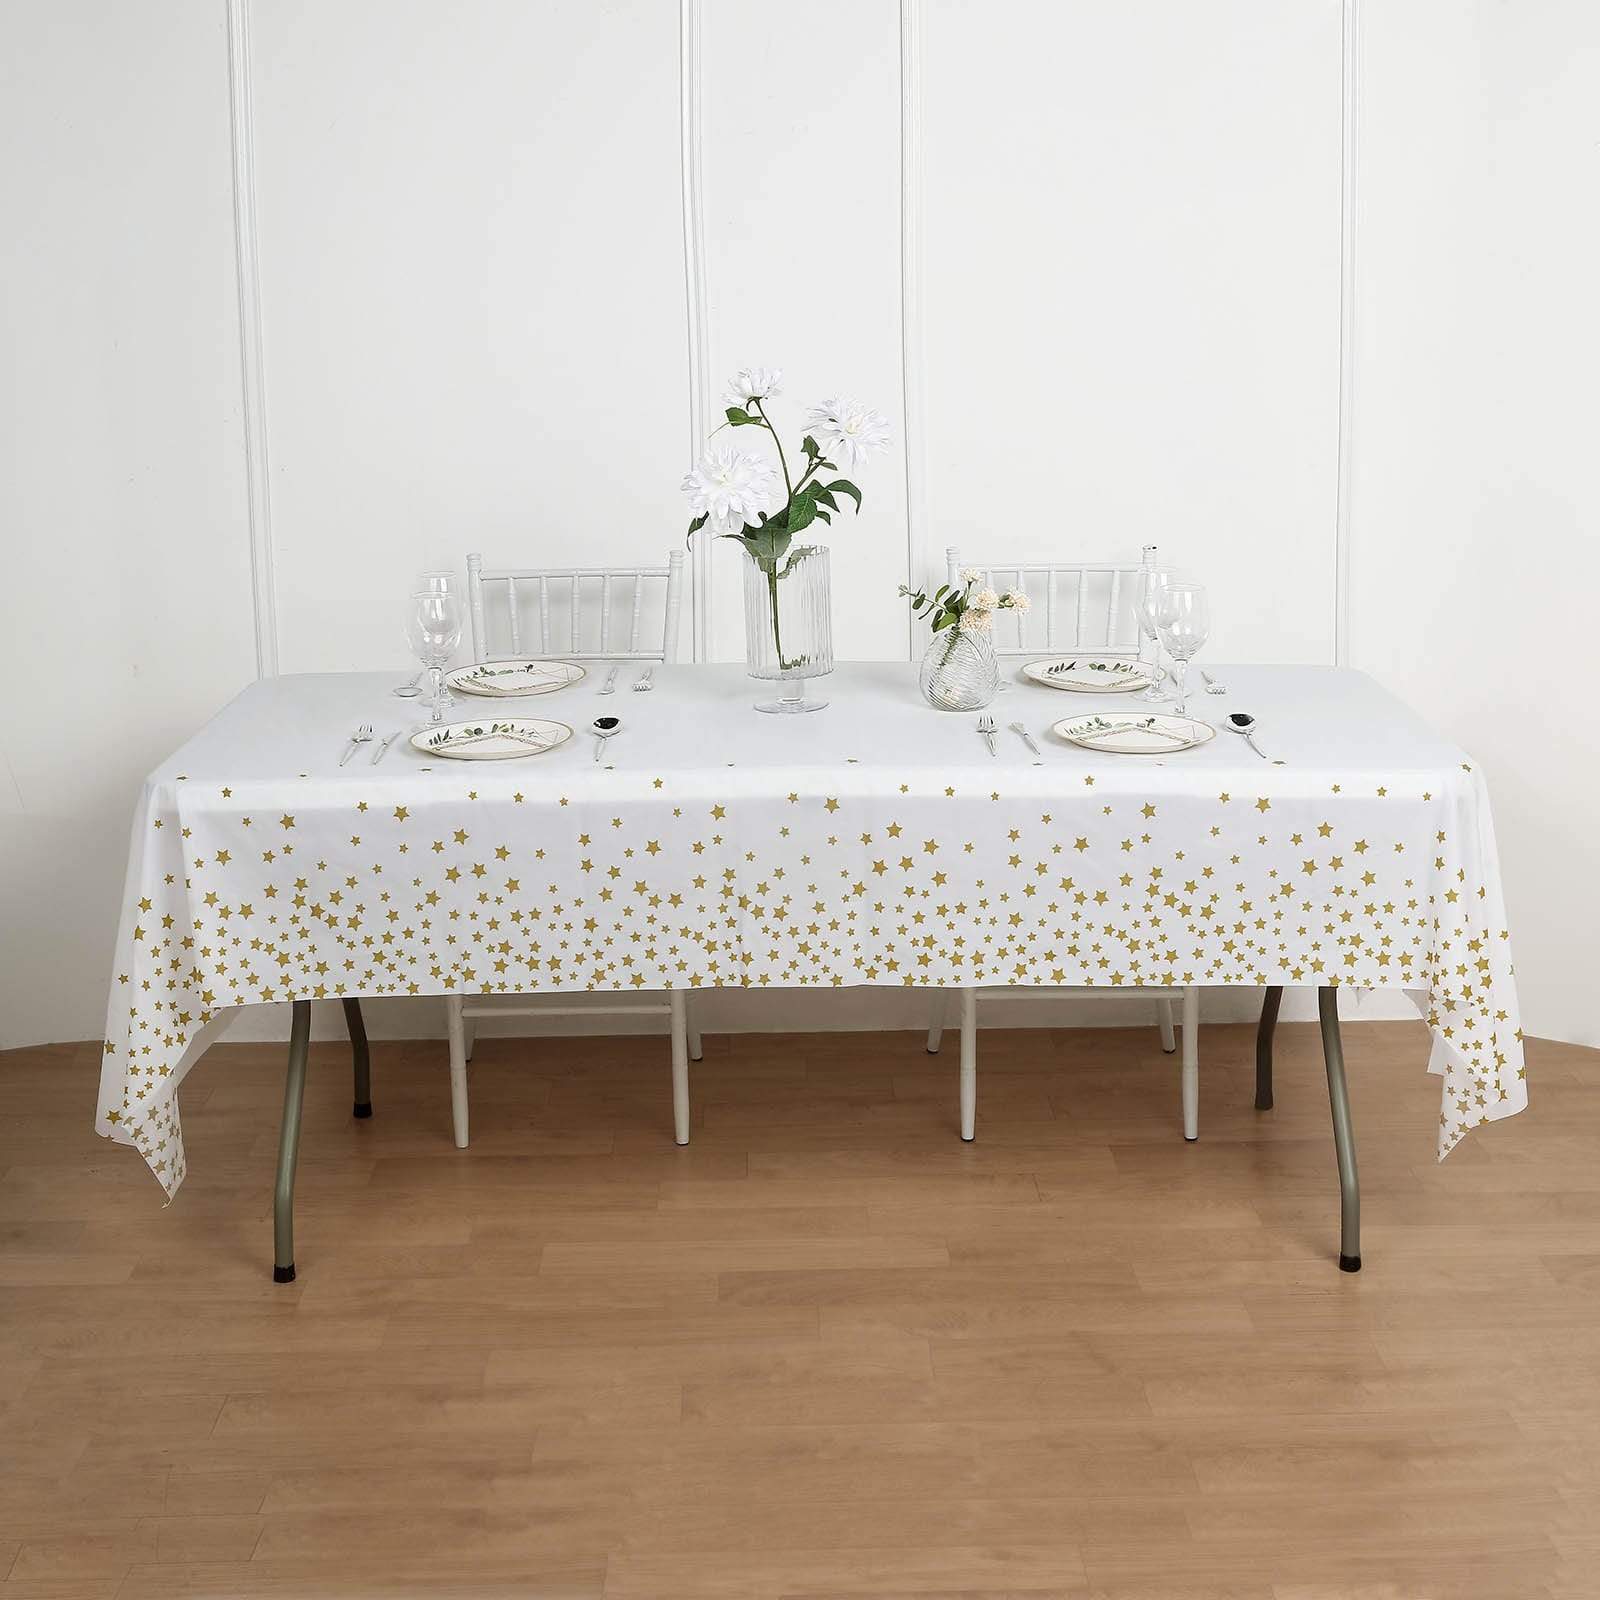 54x108 in Rectangular Disposable Plastic Tablecloth with Star Sprinkled Design